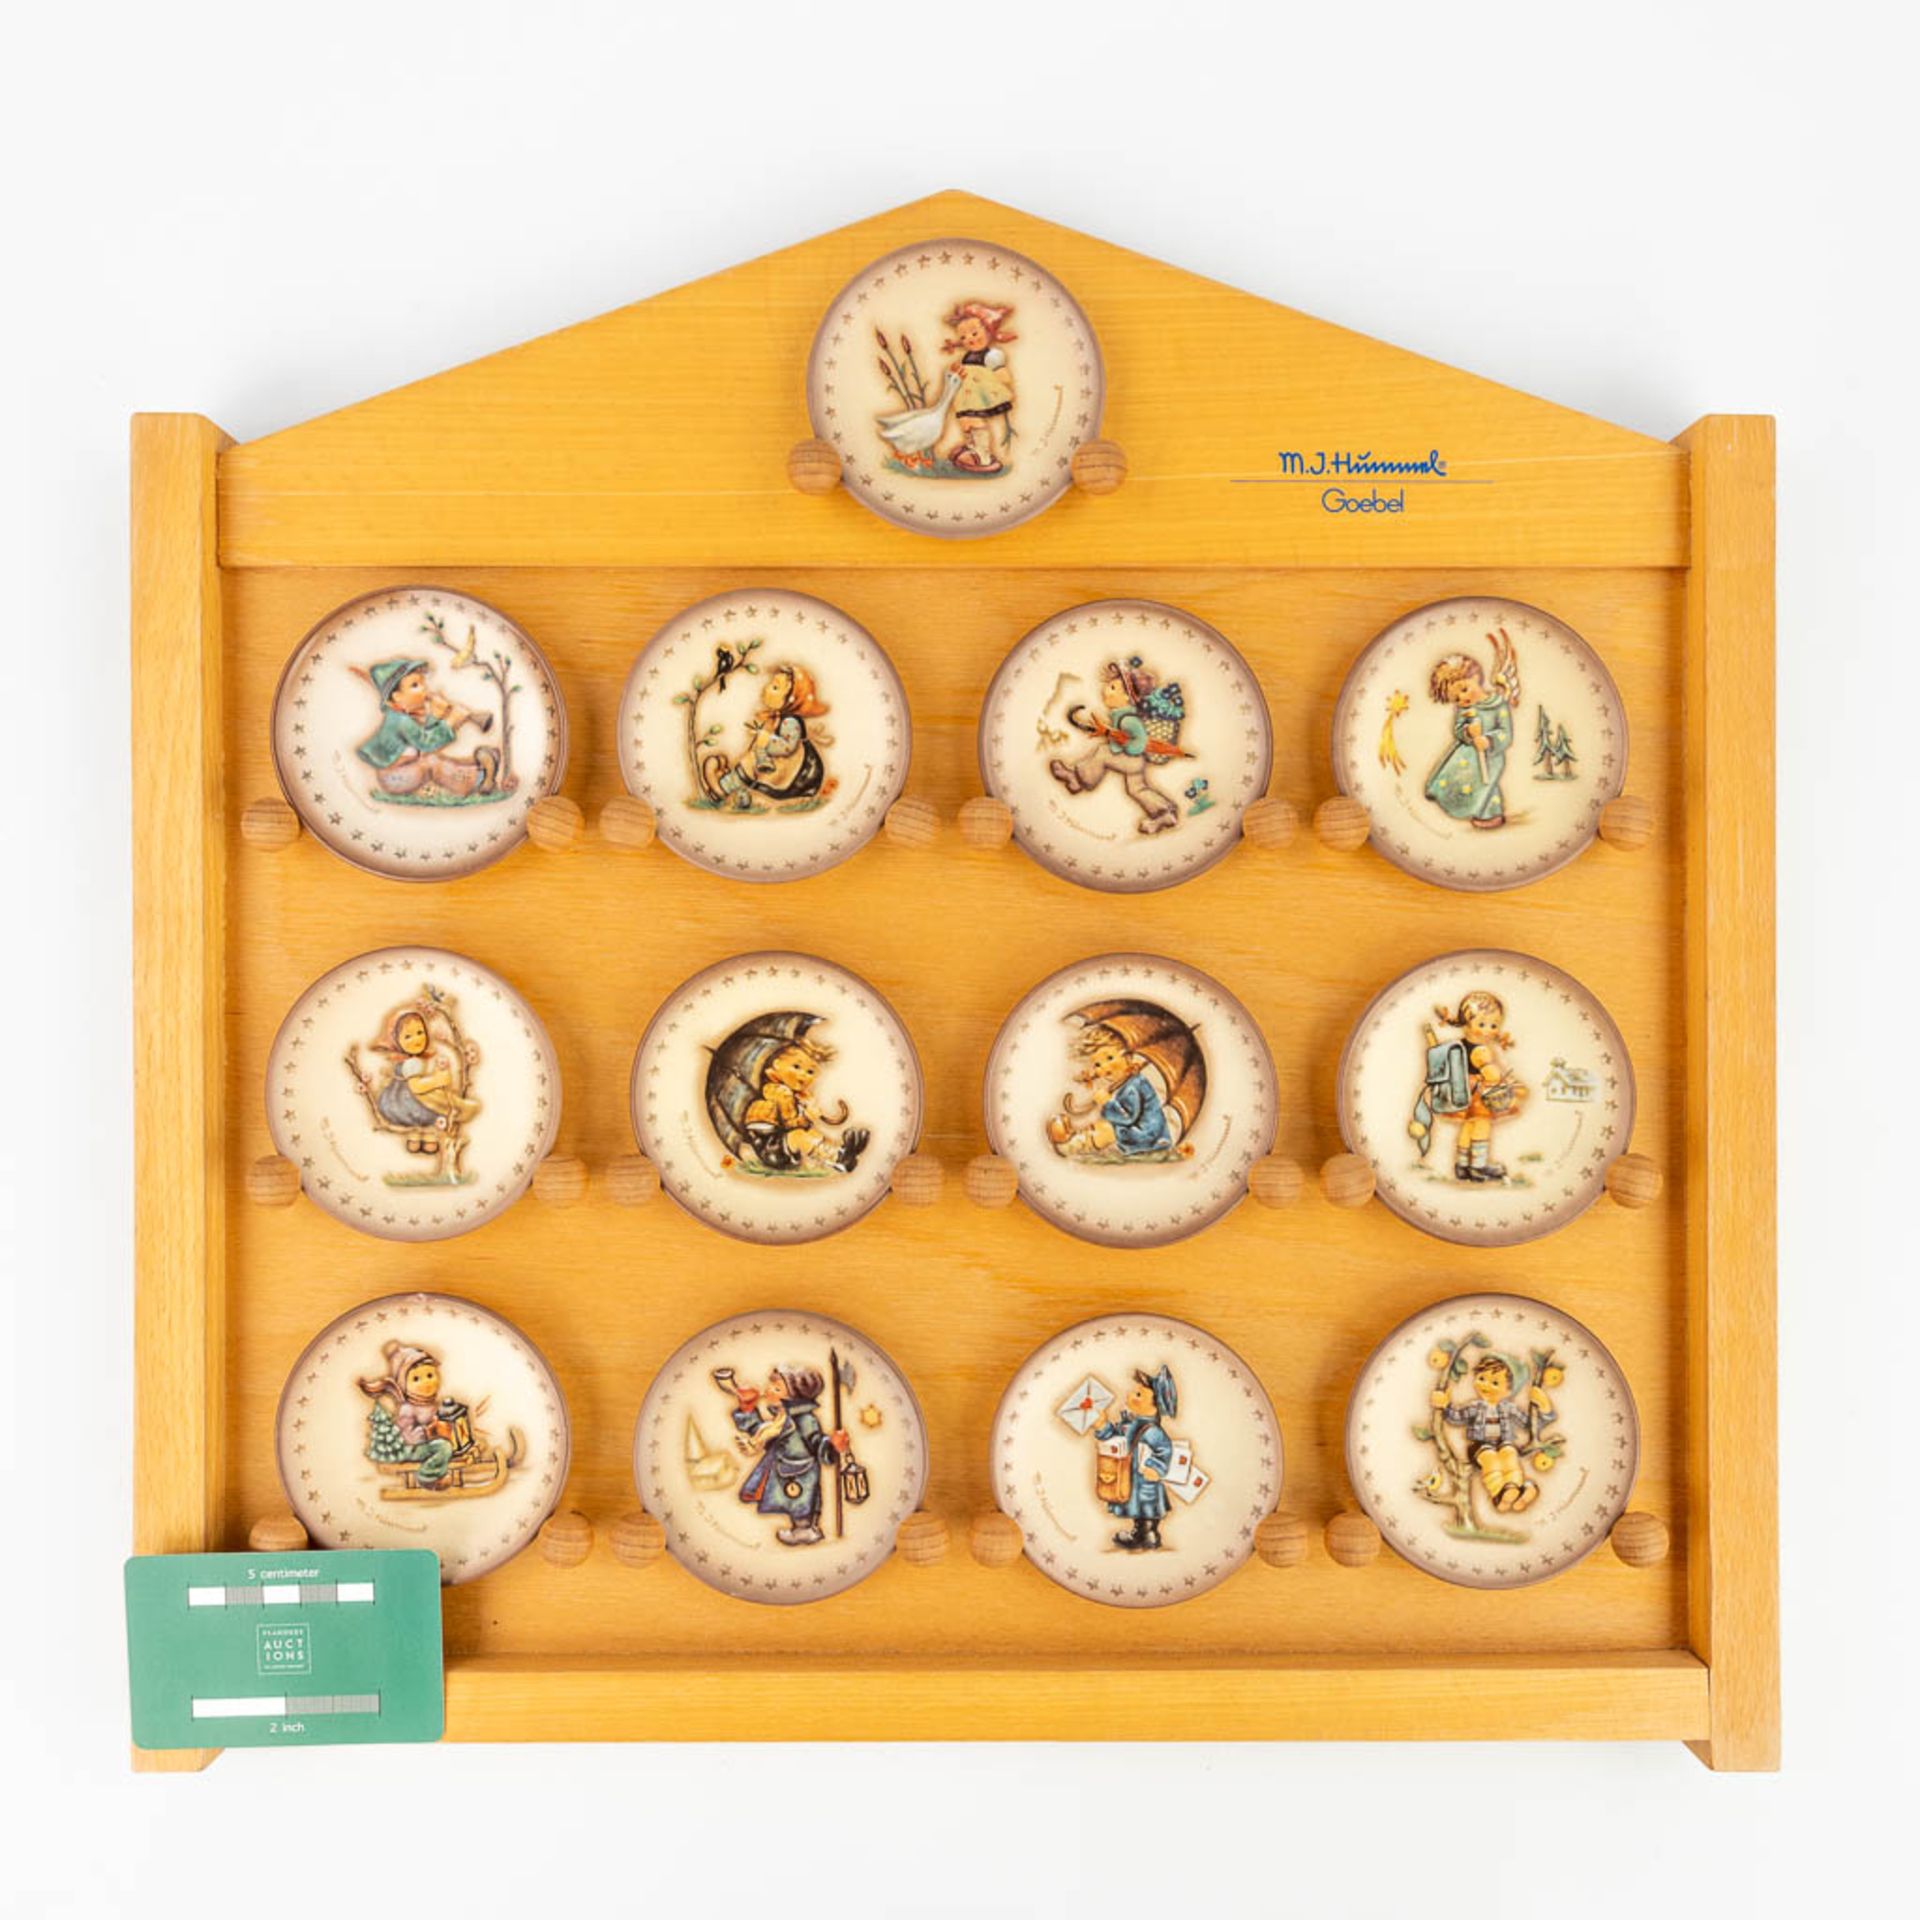 Hummel, a collection of 13 plates in a wood display case. (8,3cm) - Image 11 of 14